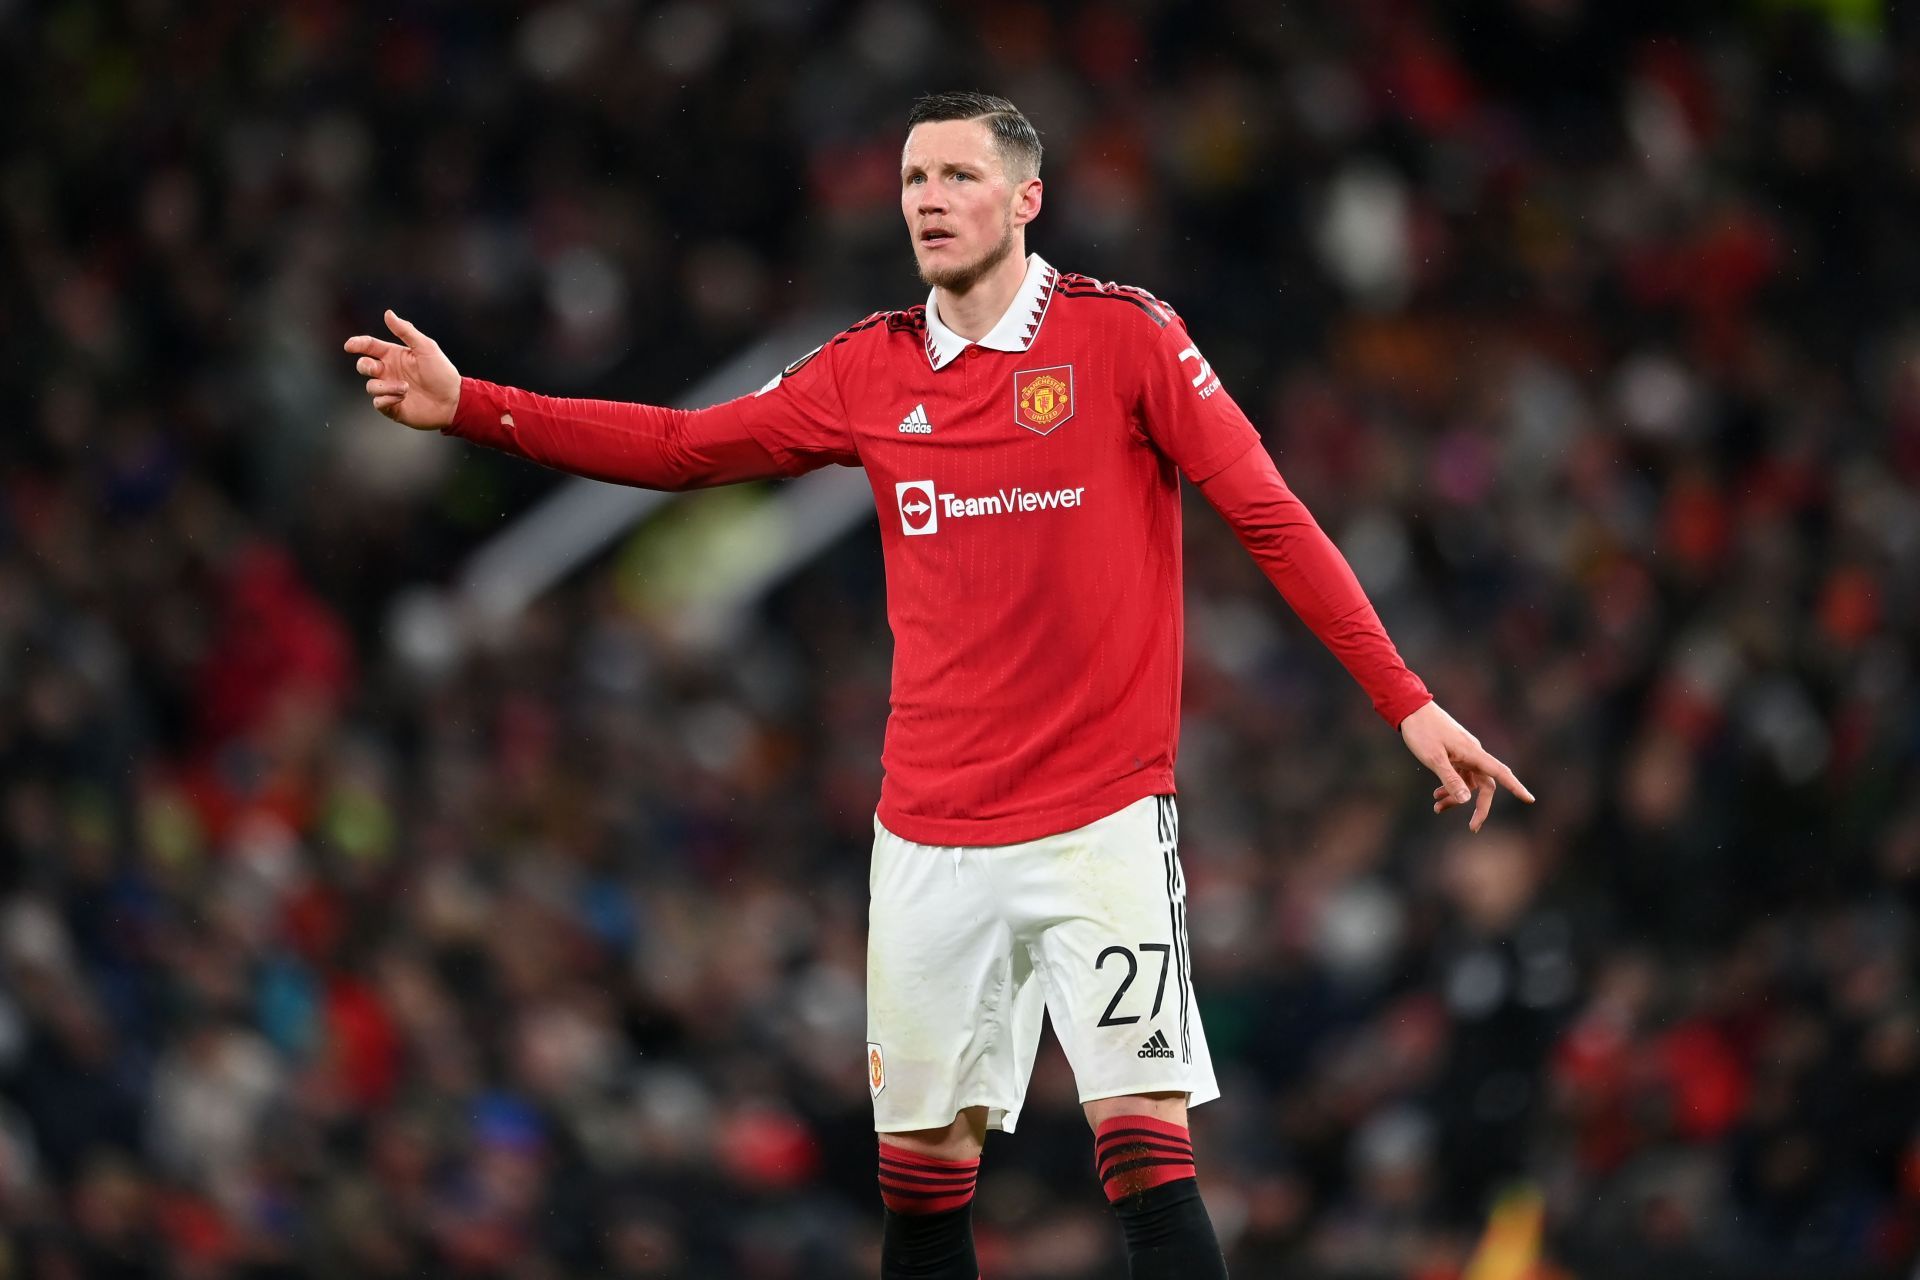 Wout Weghorst arrived at Old Trafford this January.